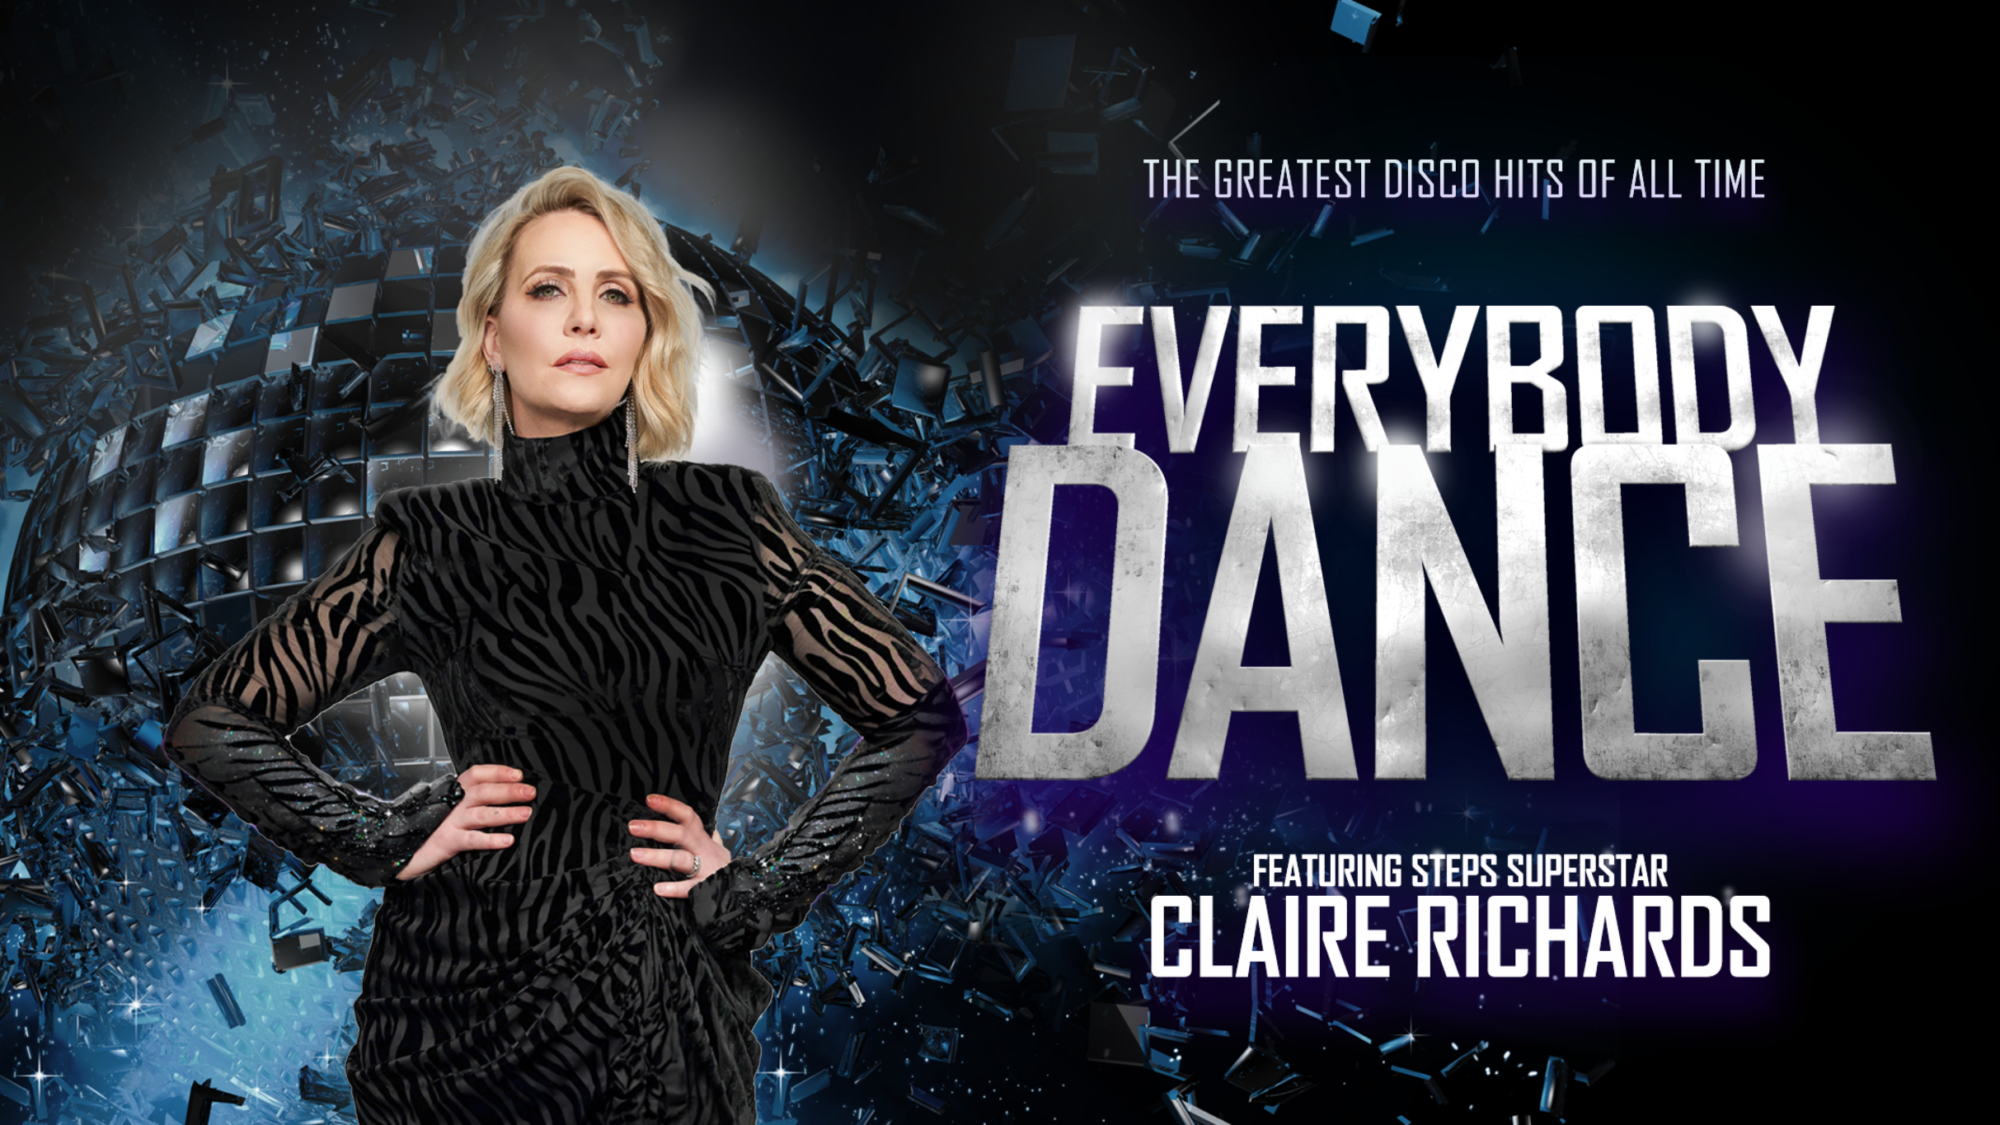 Image name Everybody Dance with Claire Richards at Hull City Hall Hull the 1 image from the post Everybody Dance with Claire Richards at Victoria Theatre, Halifax in Yorkshire.com.